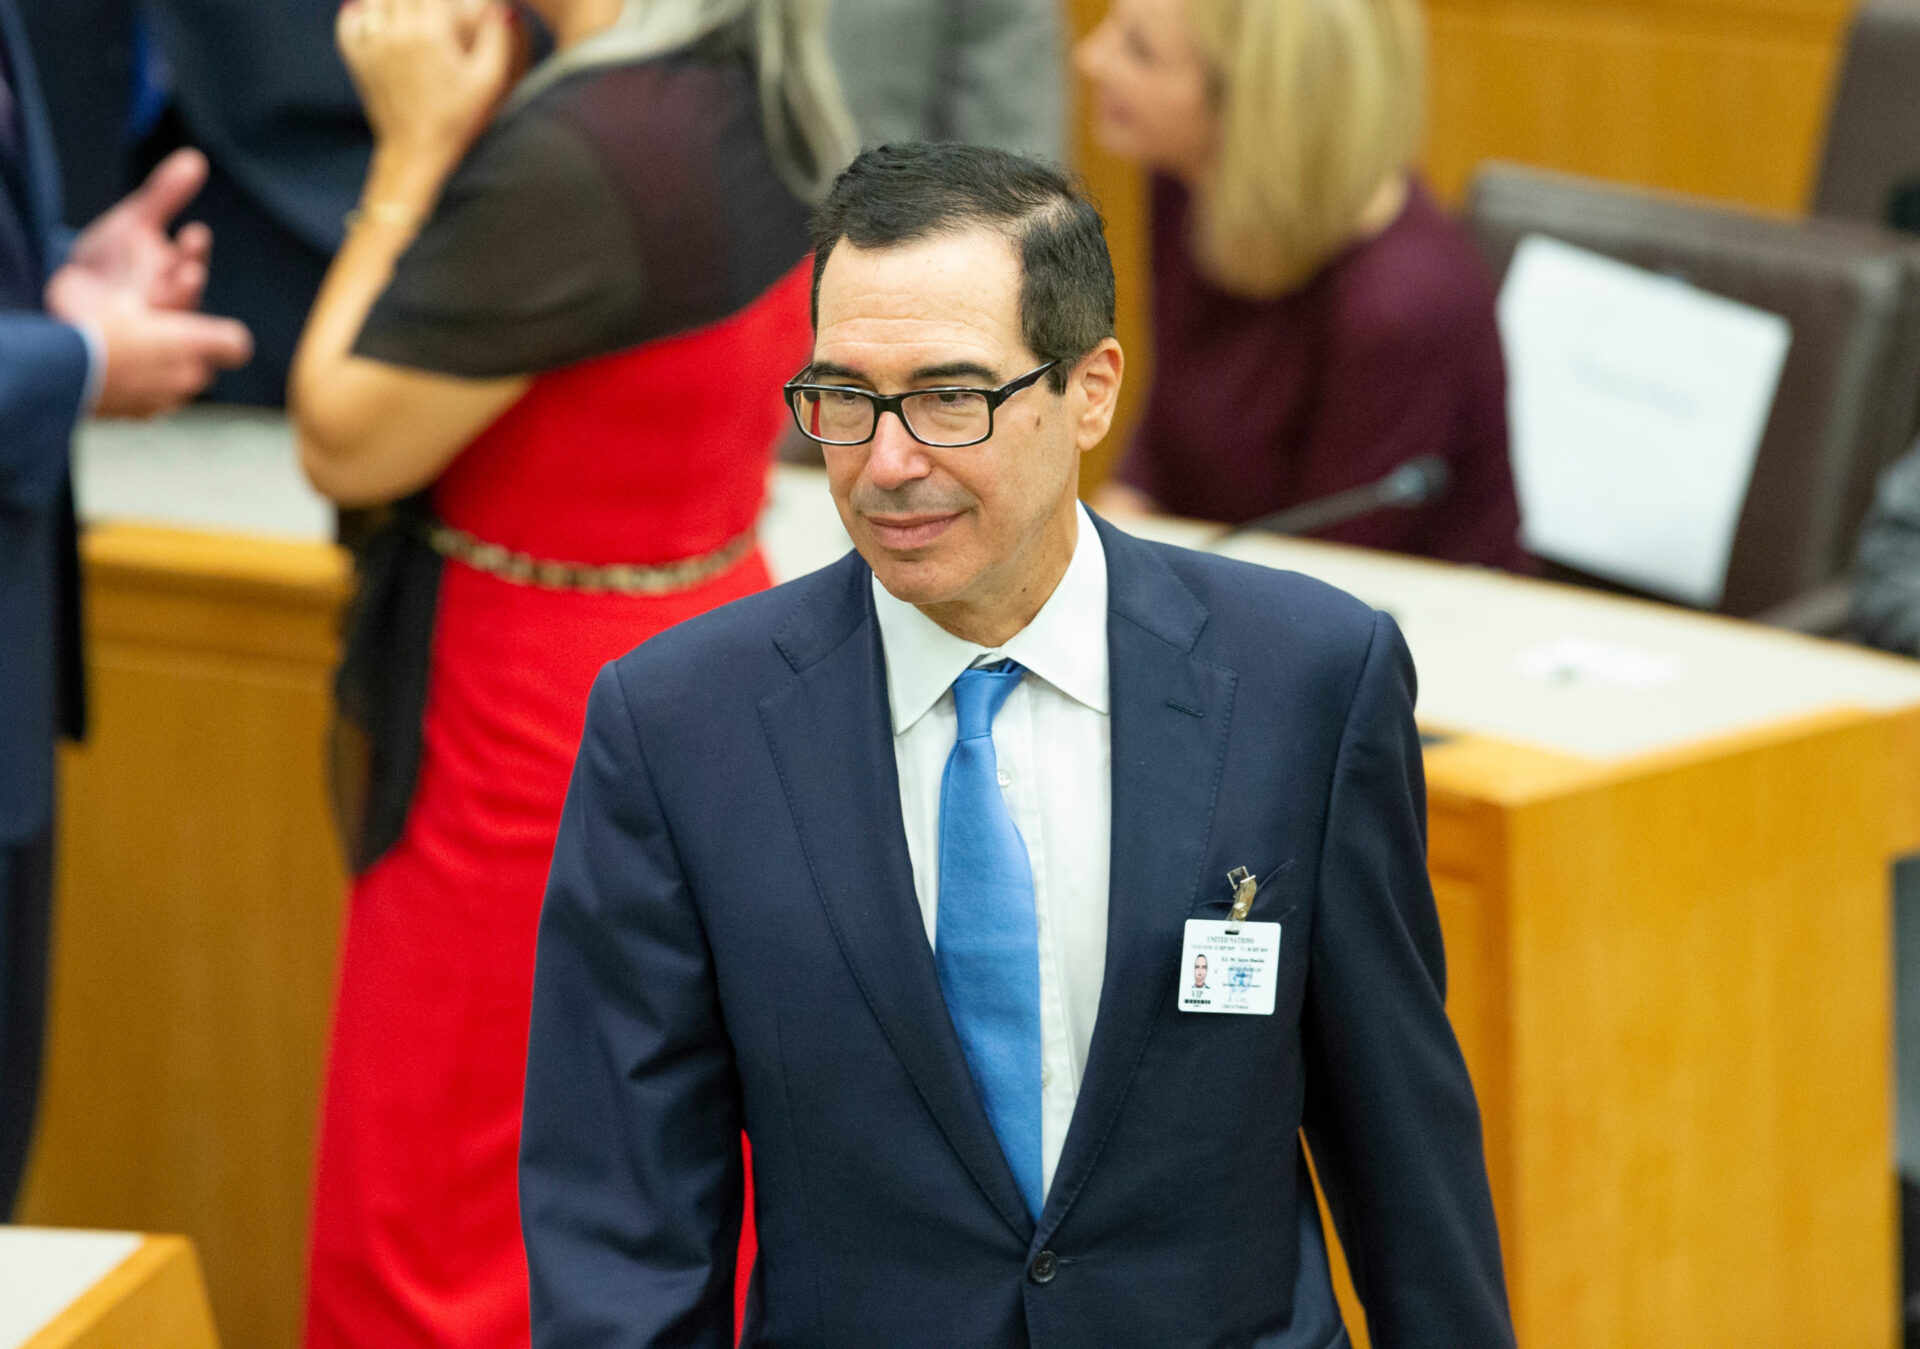 Mnuchin: “Very Aware” Of Challenges Facing Non-Bank Lenders